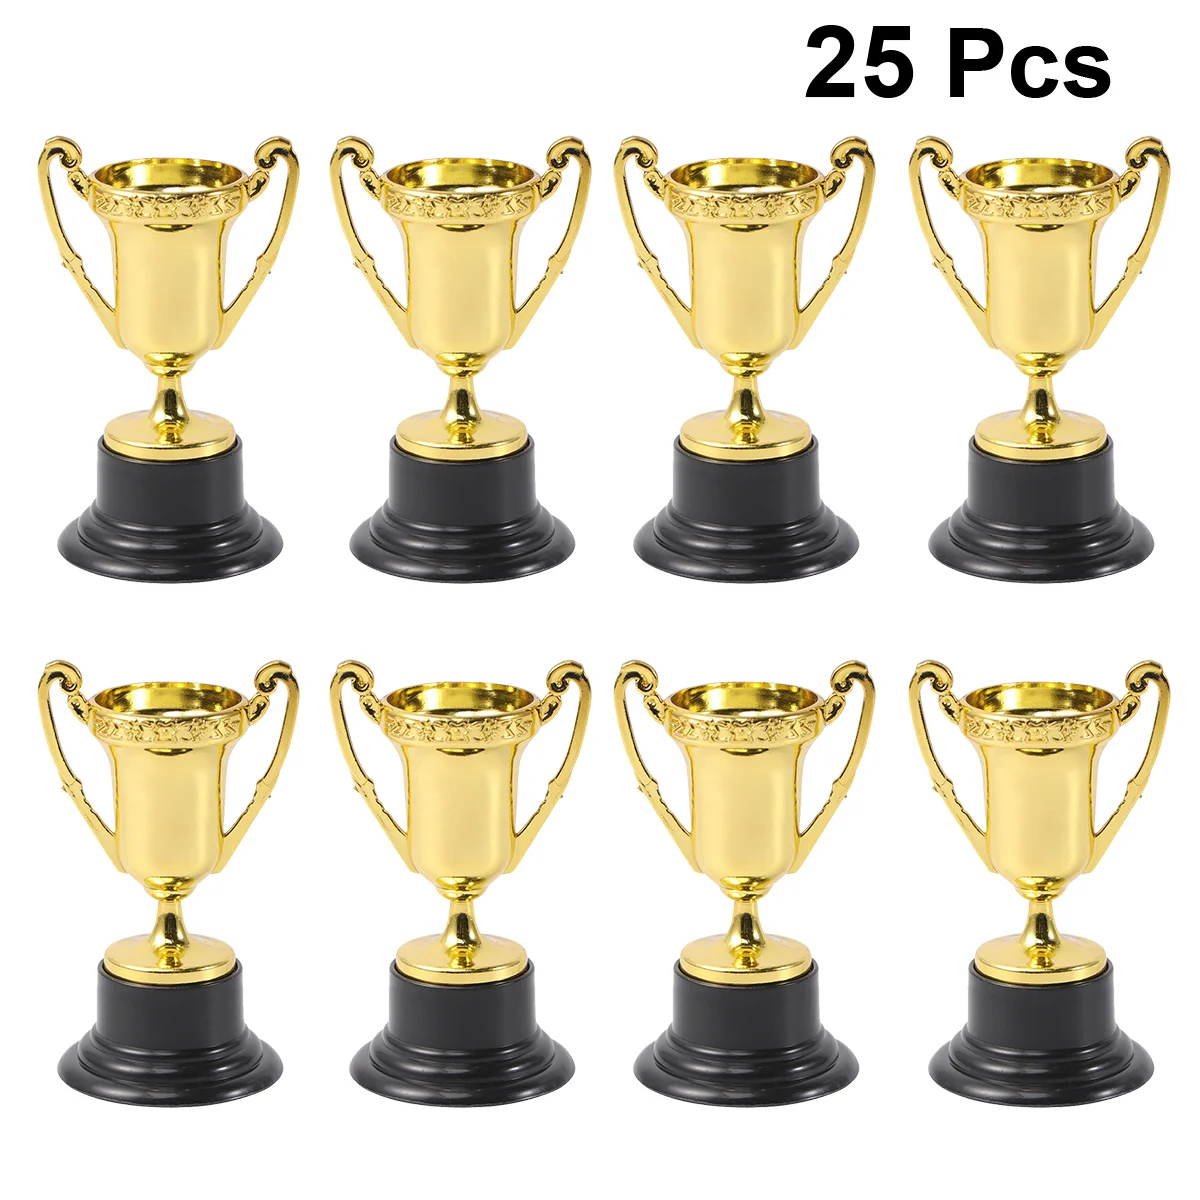 

Plastic Mini Trophy Student Sports Award Trophy with Base Reward Competitions Children Kids Toys for Game Kindergarten